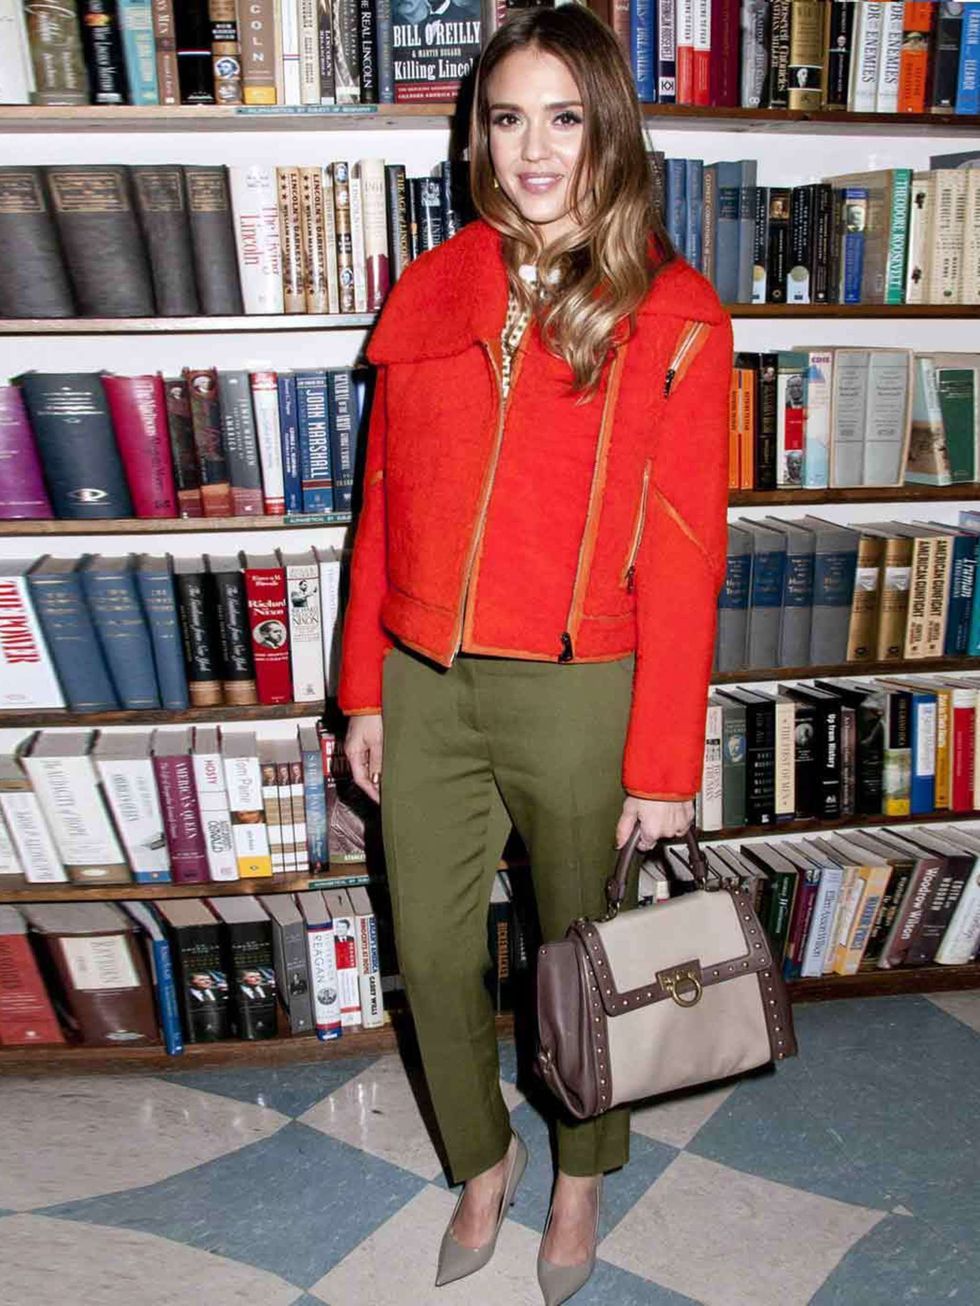 <p>Jessica Alba, is wearing a bright biker jacket to her book signing 'The Honest Life' in New York, March 2013.</p>